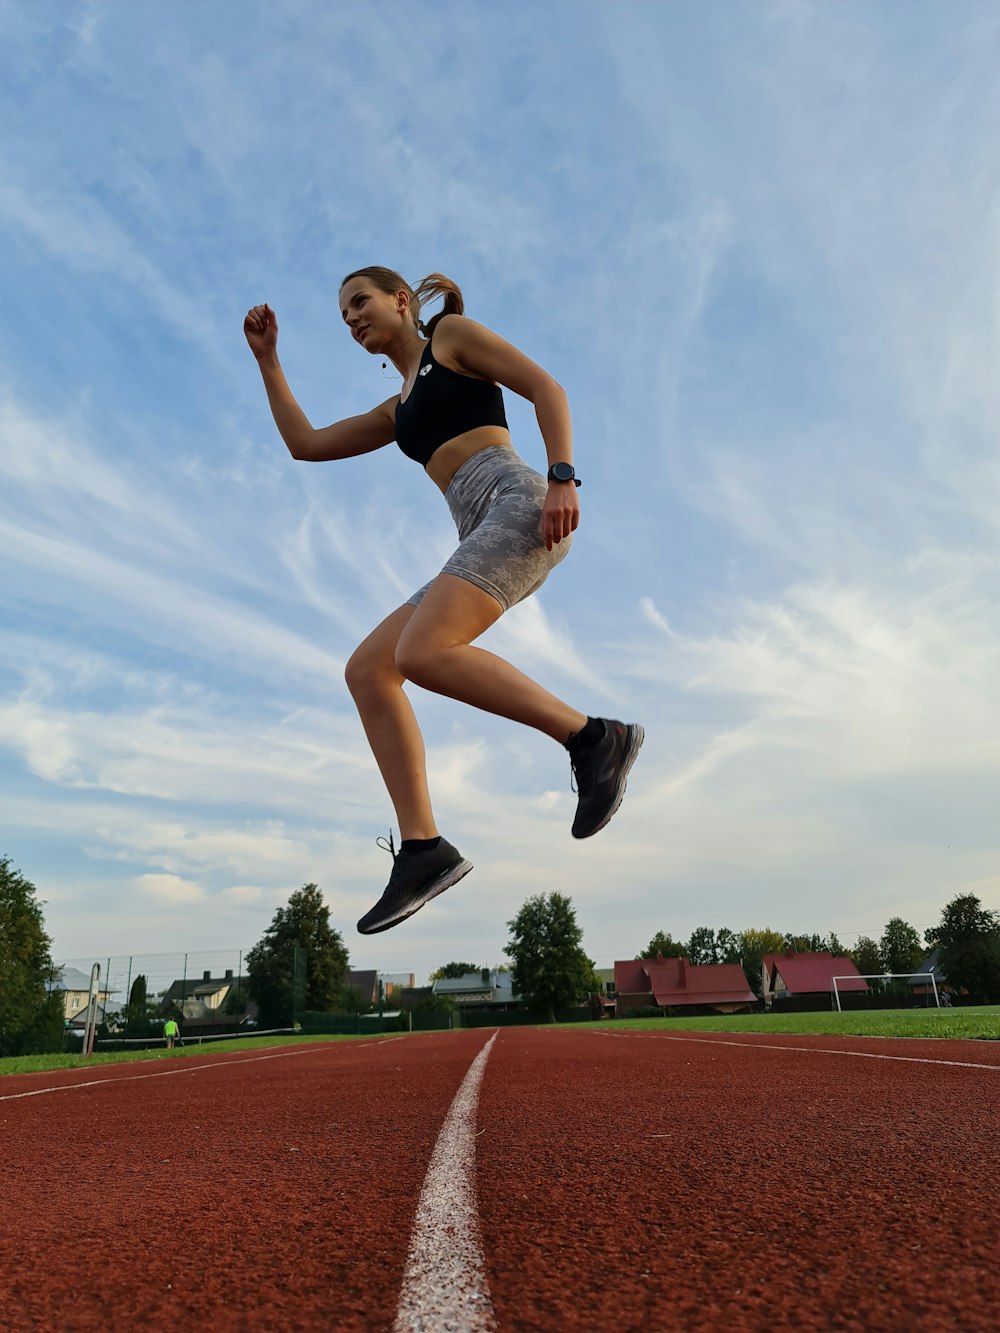 a woman is jumping in the air on a track